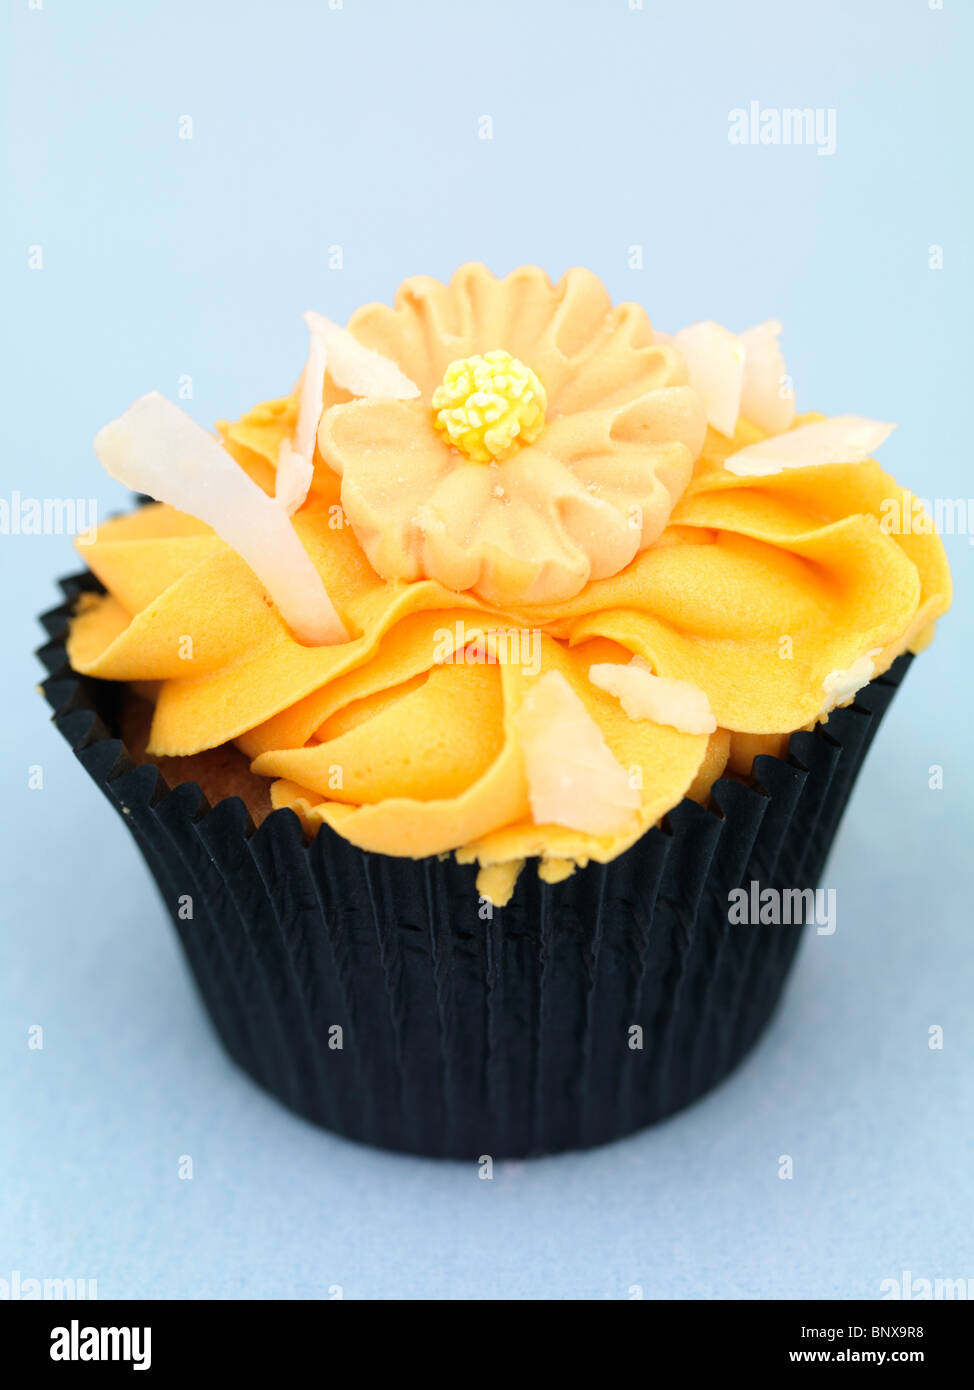 Cup Cakes Stockfoto